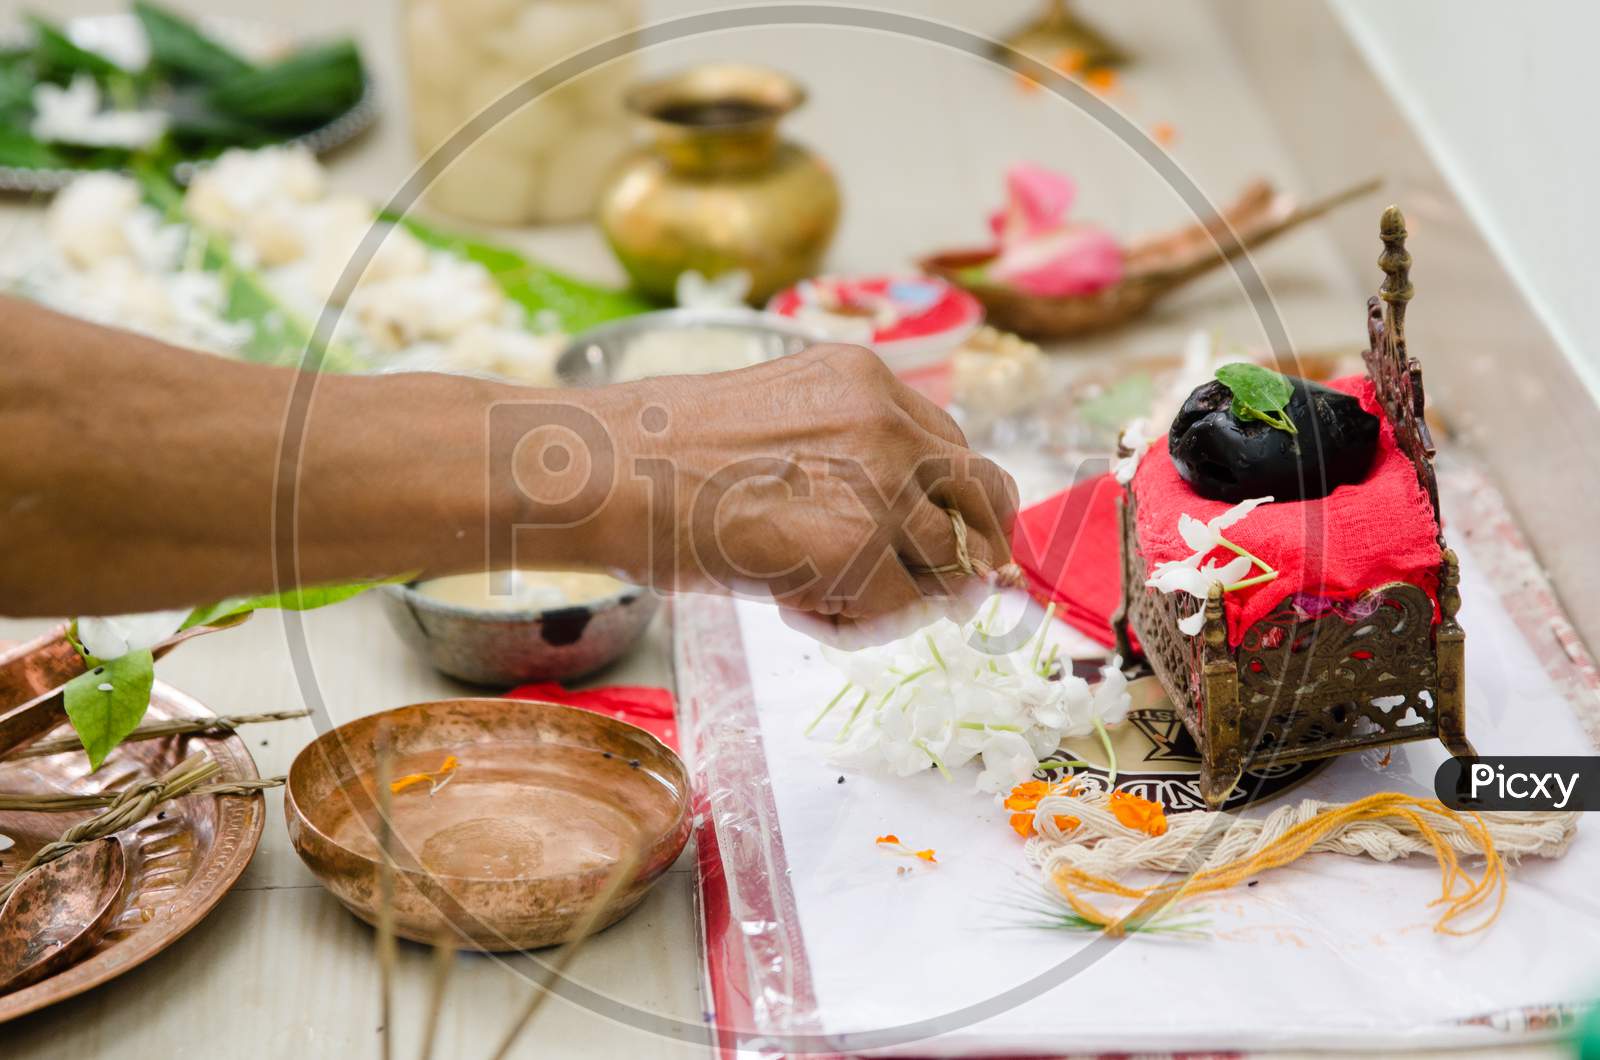 Conch kept in plate during a ritual of rice ceremony in India